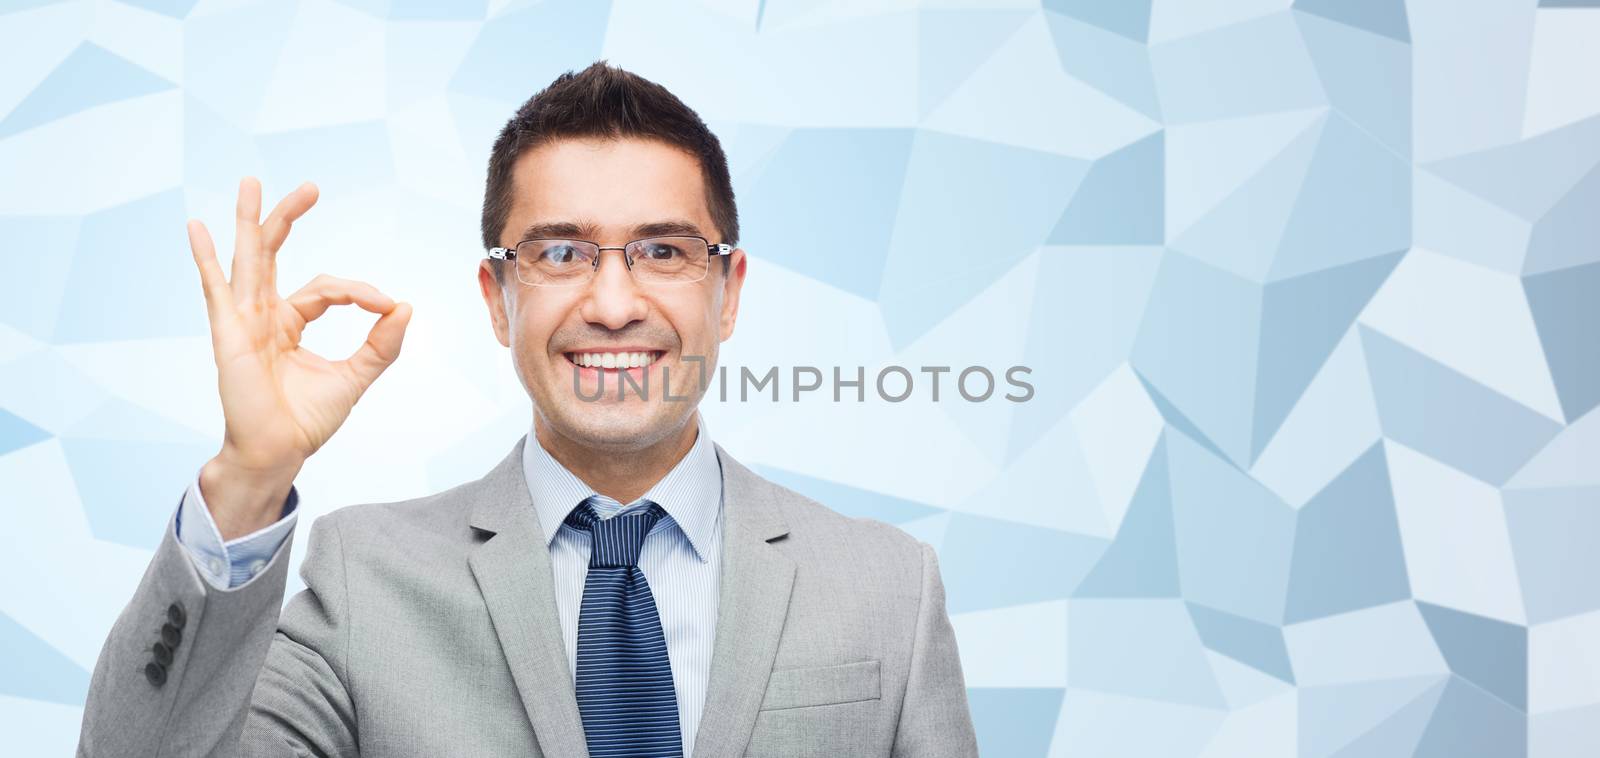 business, people, vision and office concept - happy smiling businessman in eyeglasses and suit showing ok gesture over gray graphic low poly background